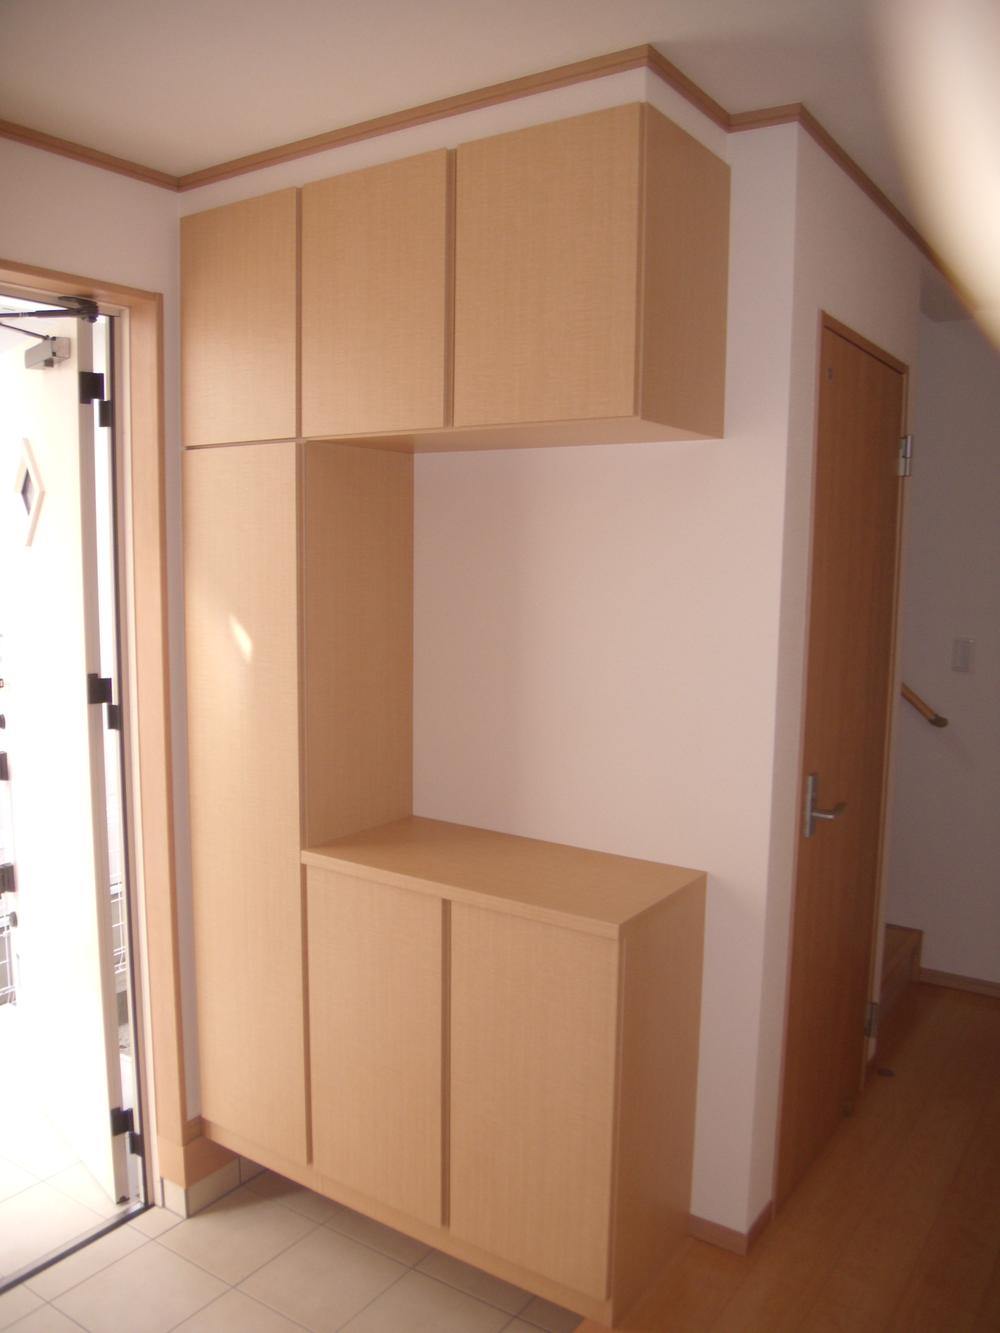 Same specifications photos (Other introspection). Entrance storage